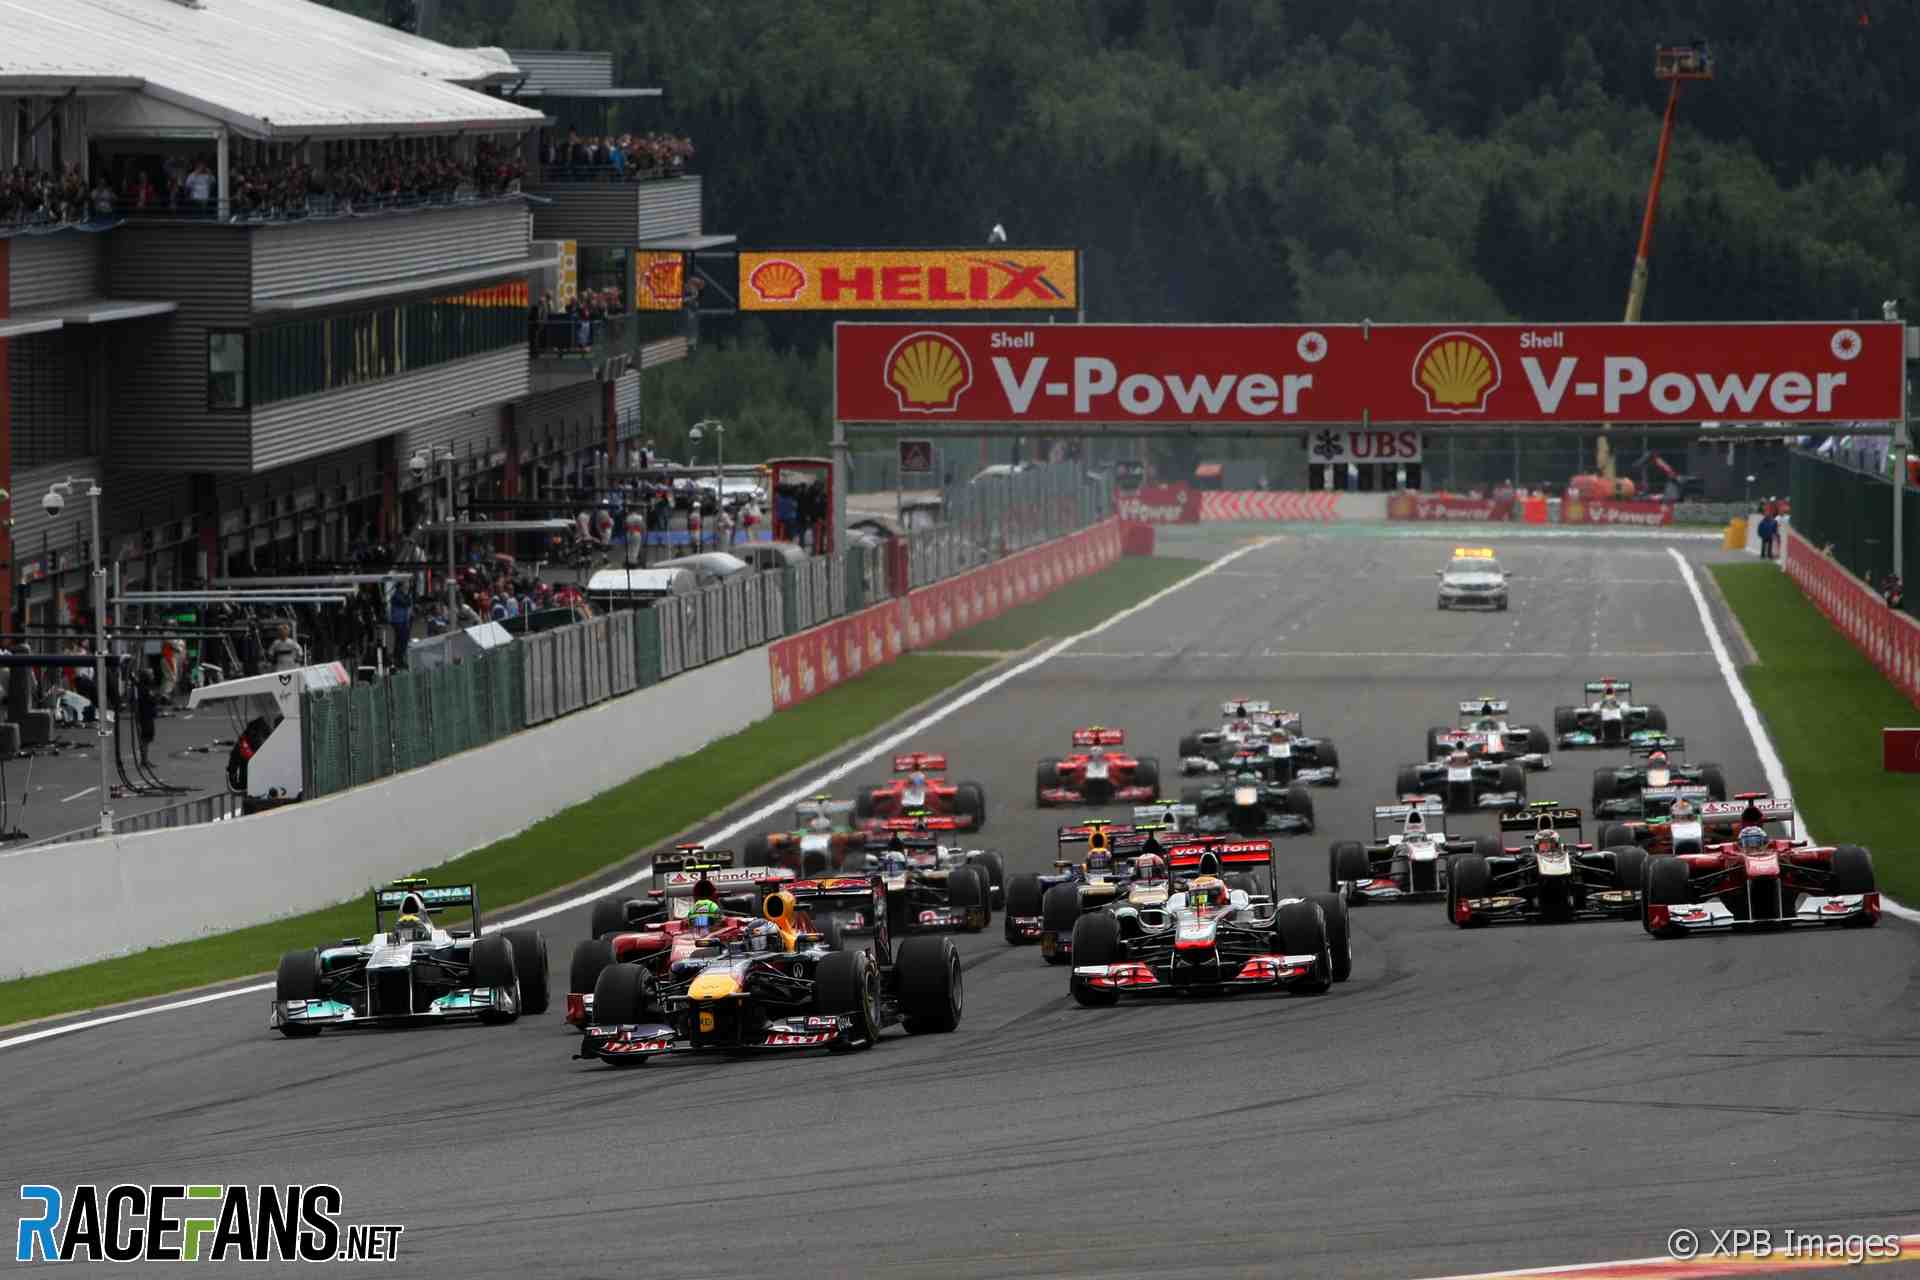 The start of the 2011 Belgian Grand Prix at Spa-Francorchamps